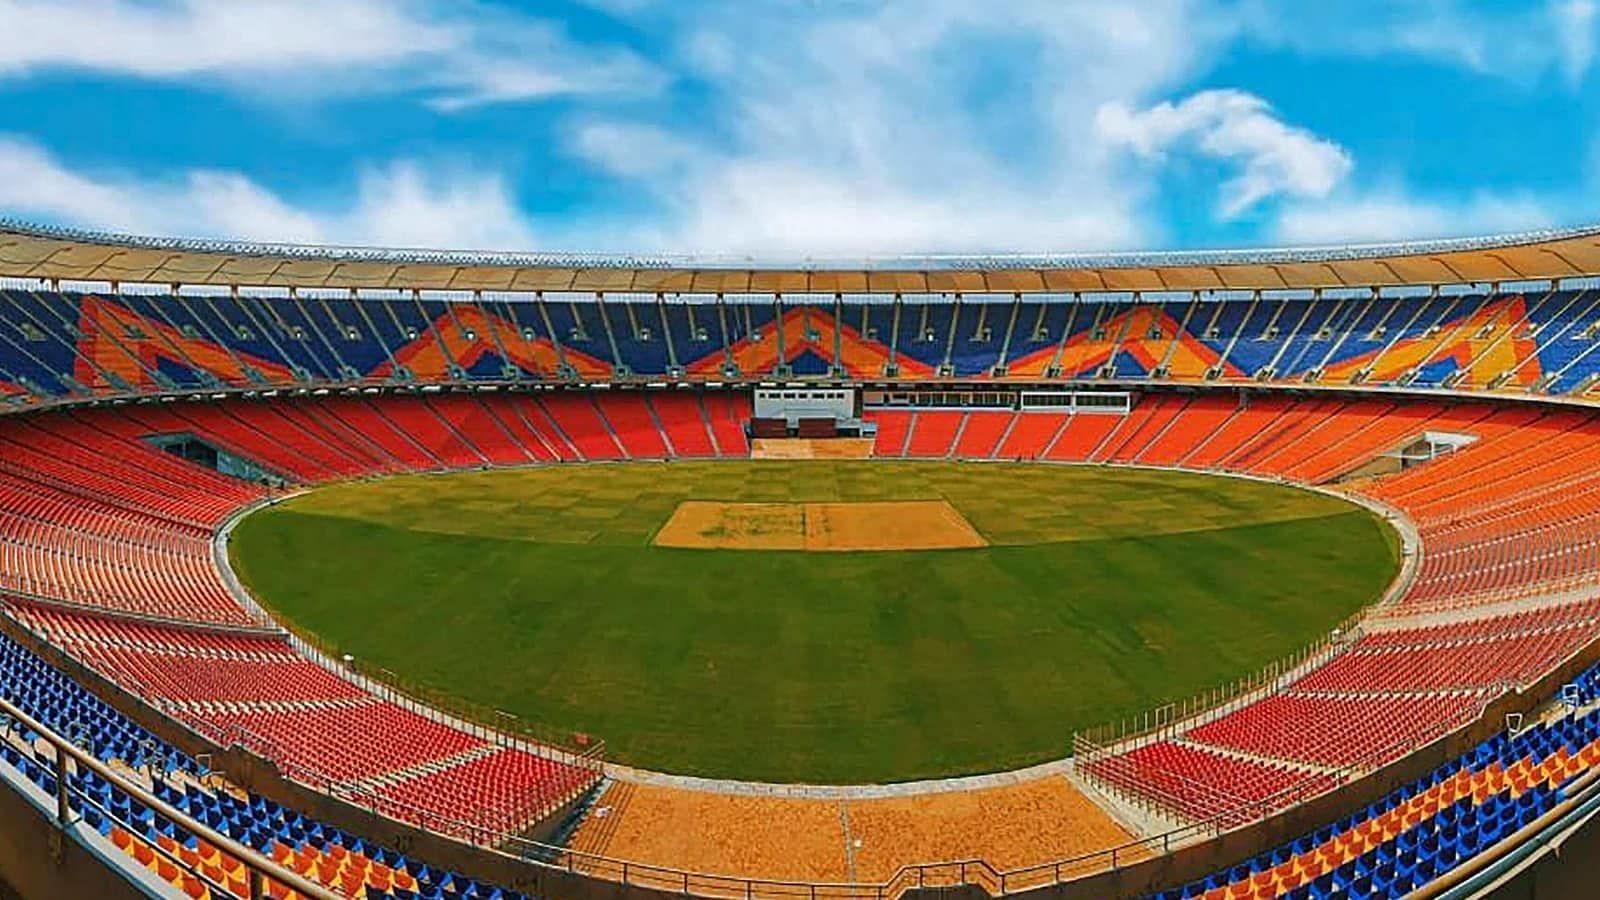 The Narendra Modi Stadium in Ahmedabad is the world&#039;s largest cricket stadium, with a seating capacity of over 1 Lakh.